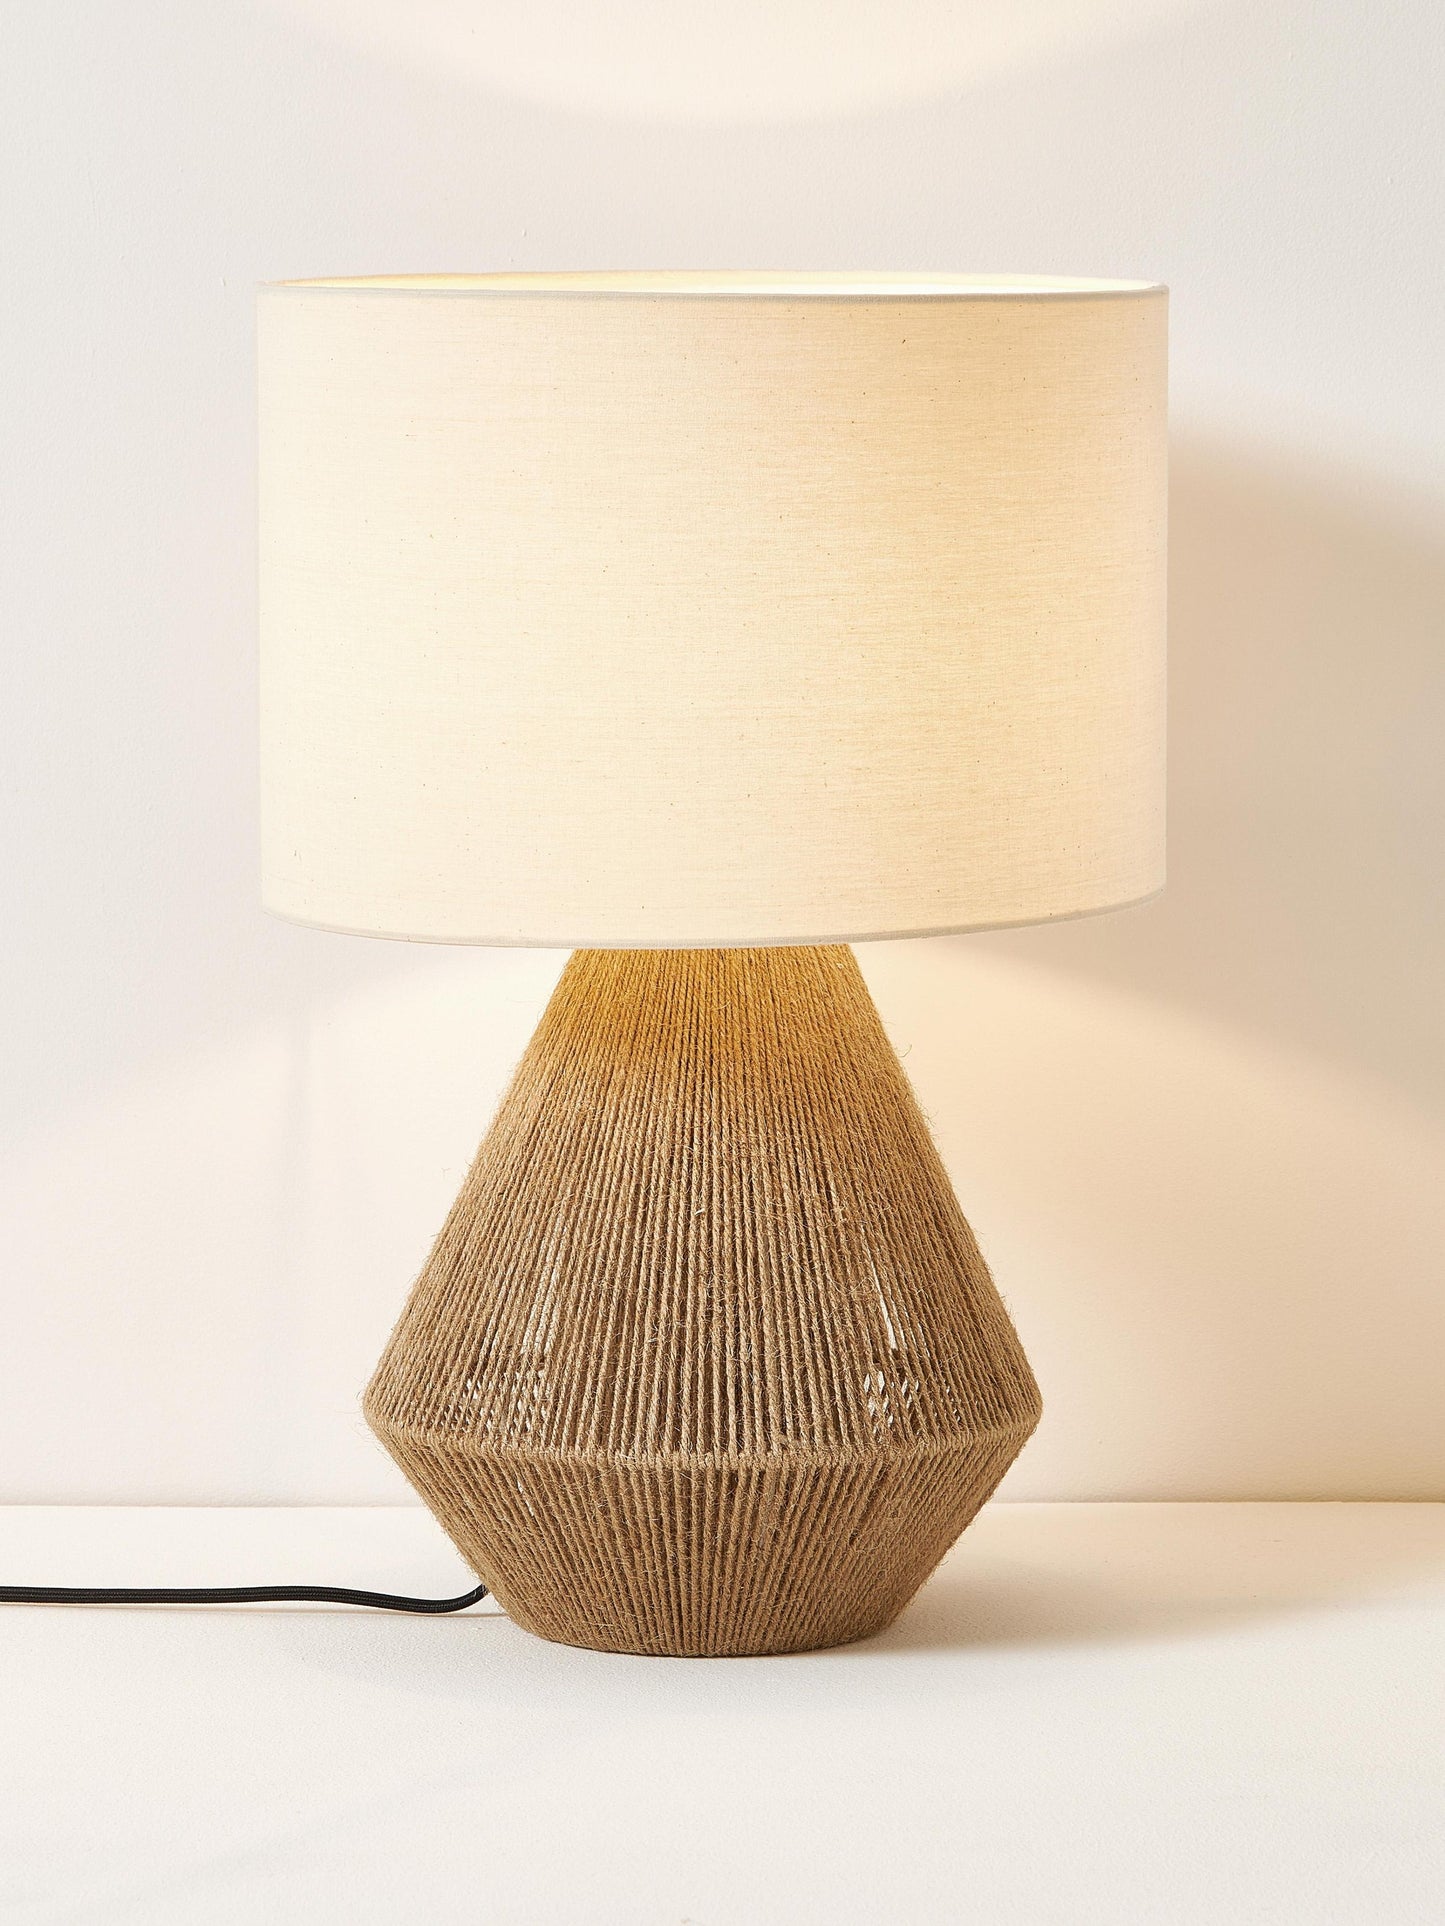 Rattan Table lamp for Living room | Bamboo Bedside table lamp | Cane Table lamp -Diva - Akway